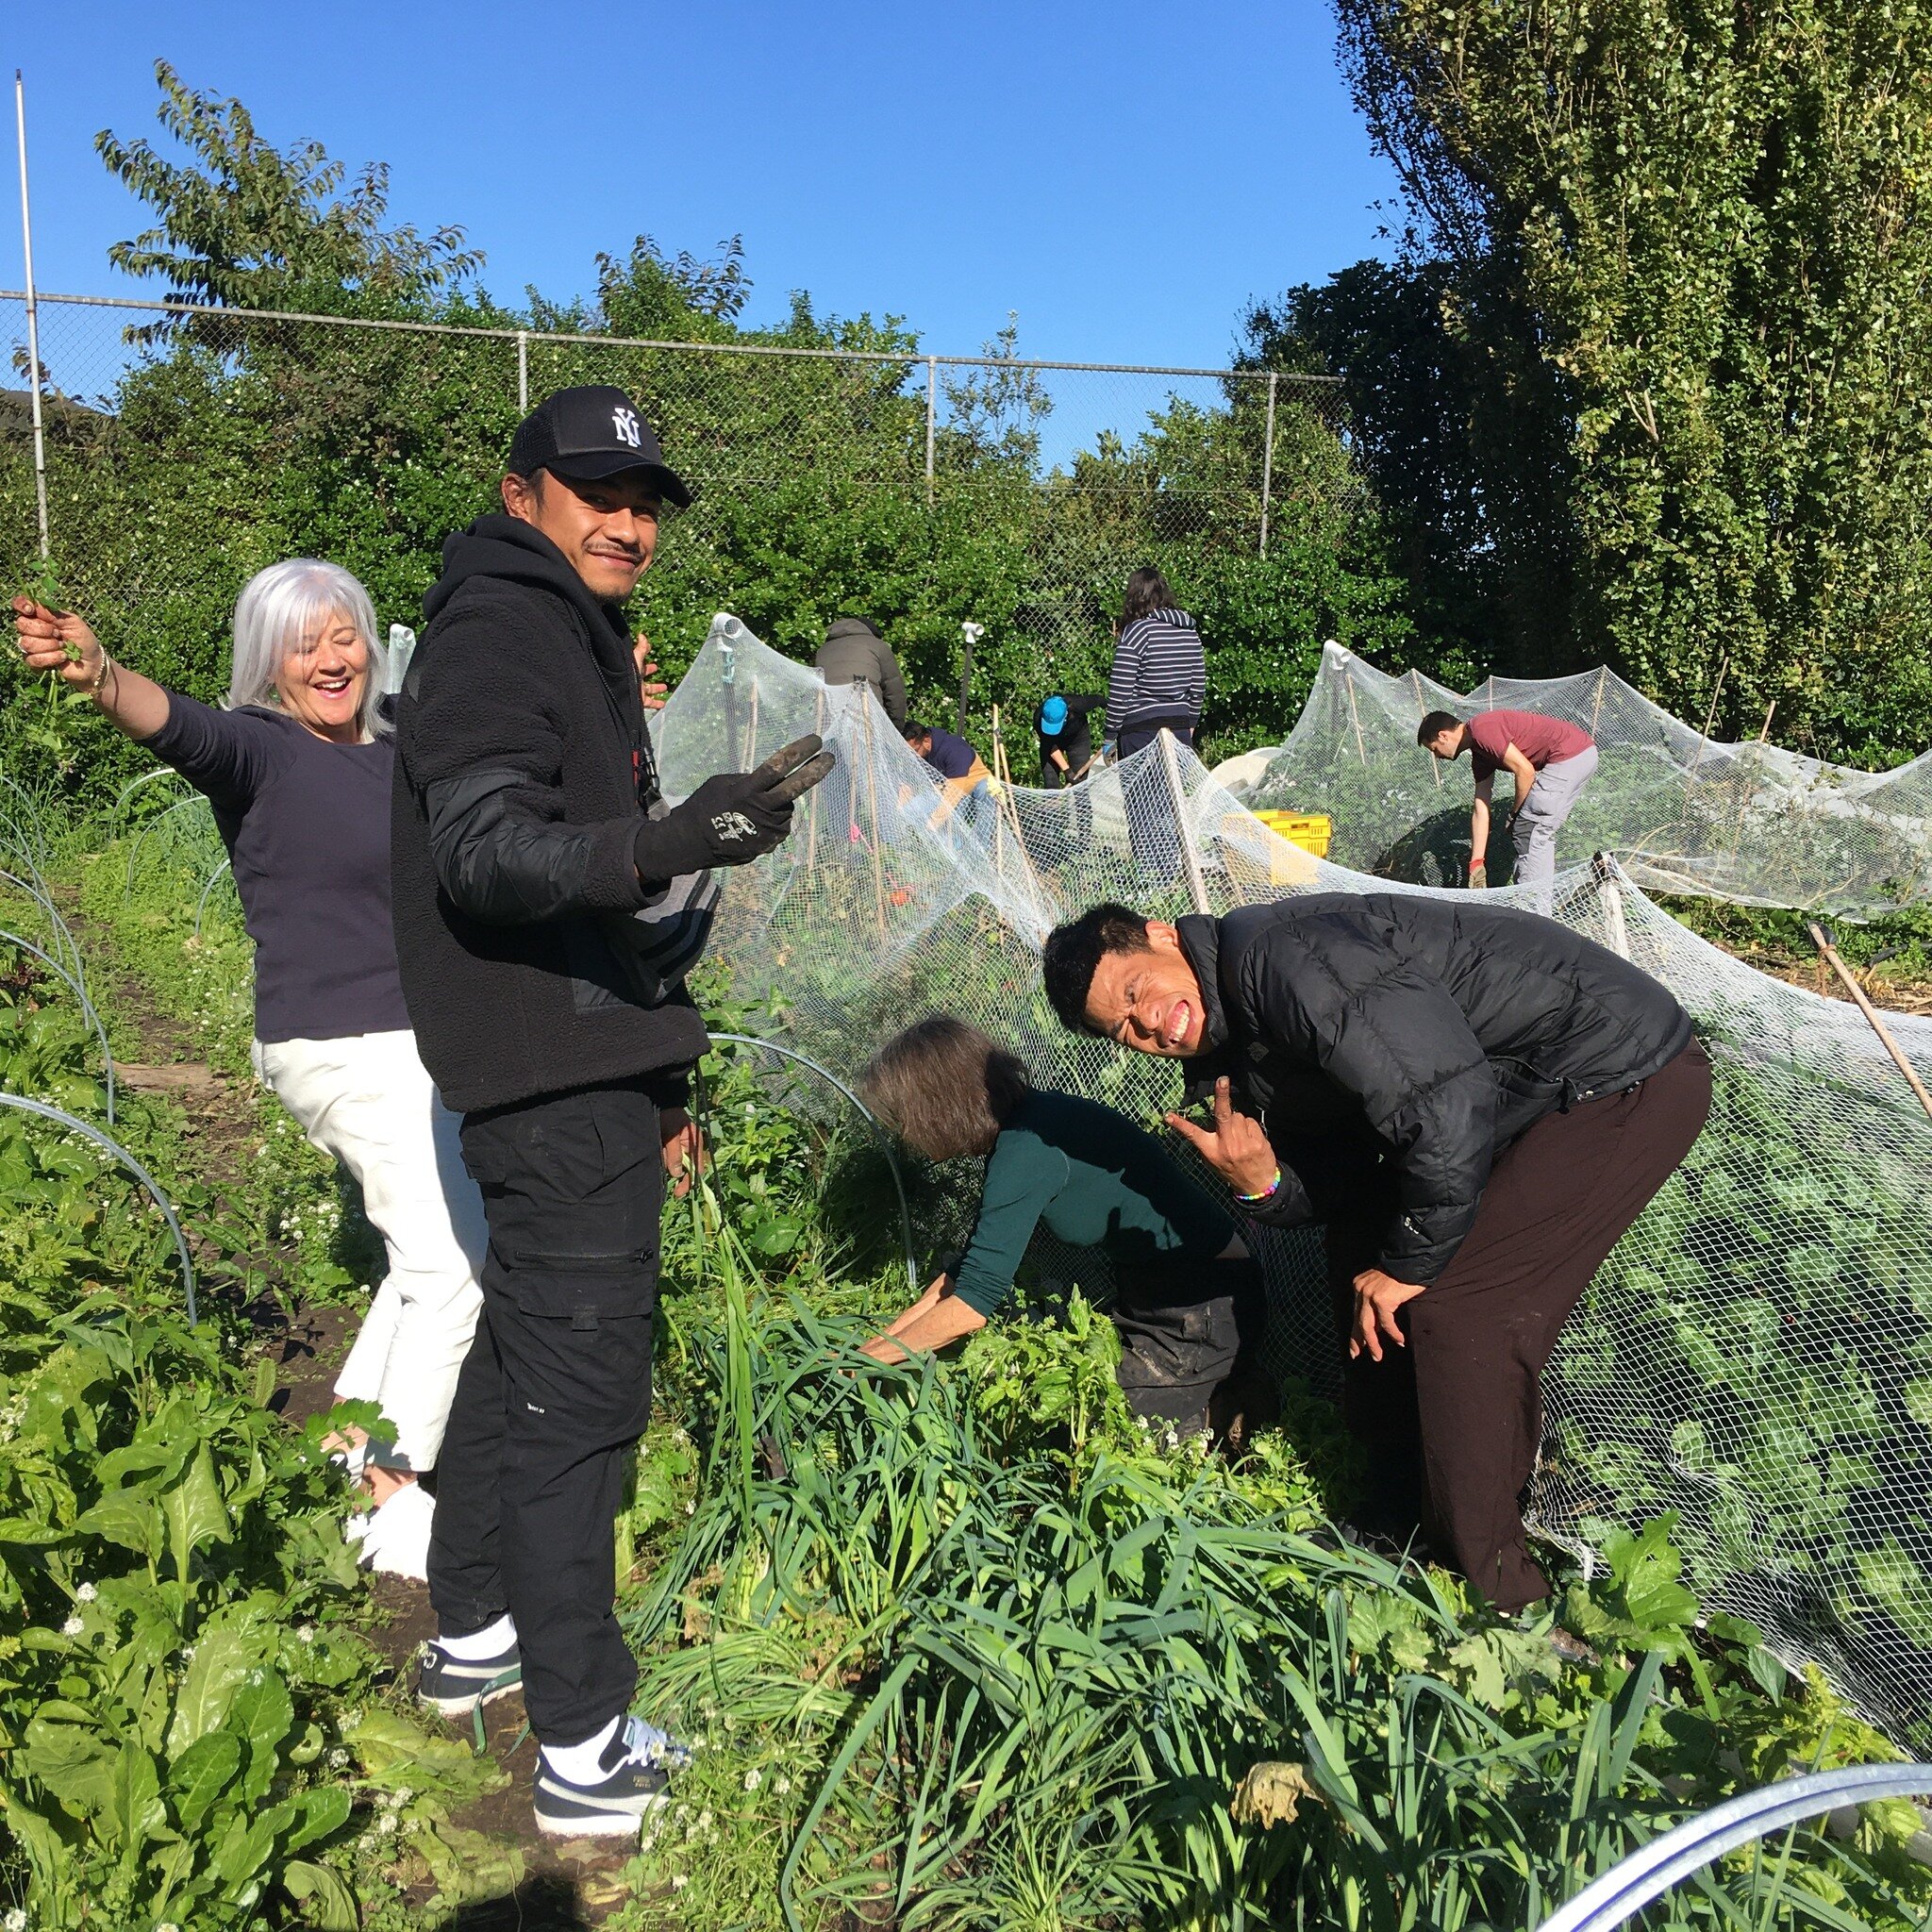 Beautiful day in the māra yesterday! Thank you to all our helpers - special shout out to Youth Inspire for bringing a crew of hard working and curious young folk to our session! We built a lasagne compost using our corn stalks and weeds from around t